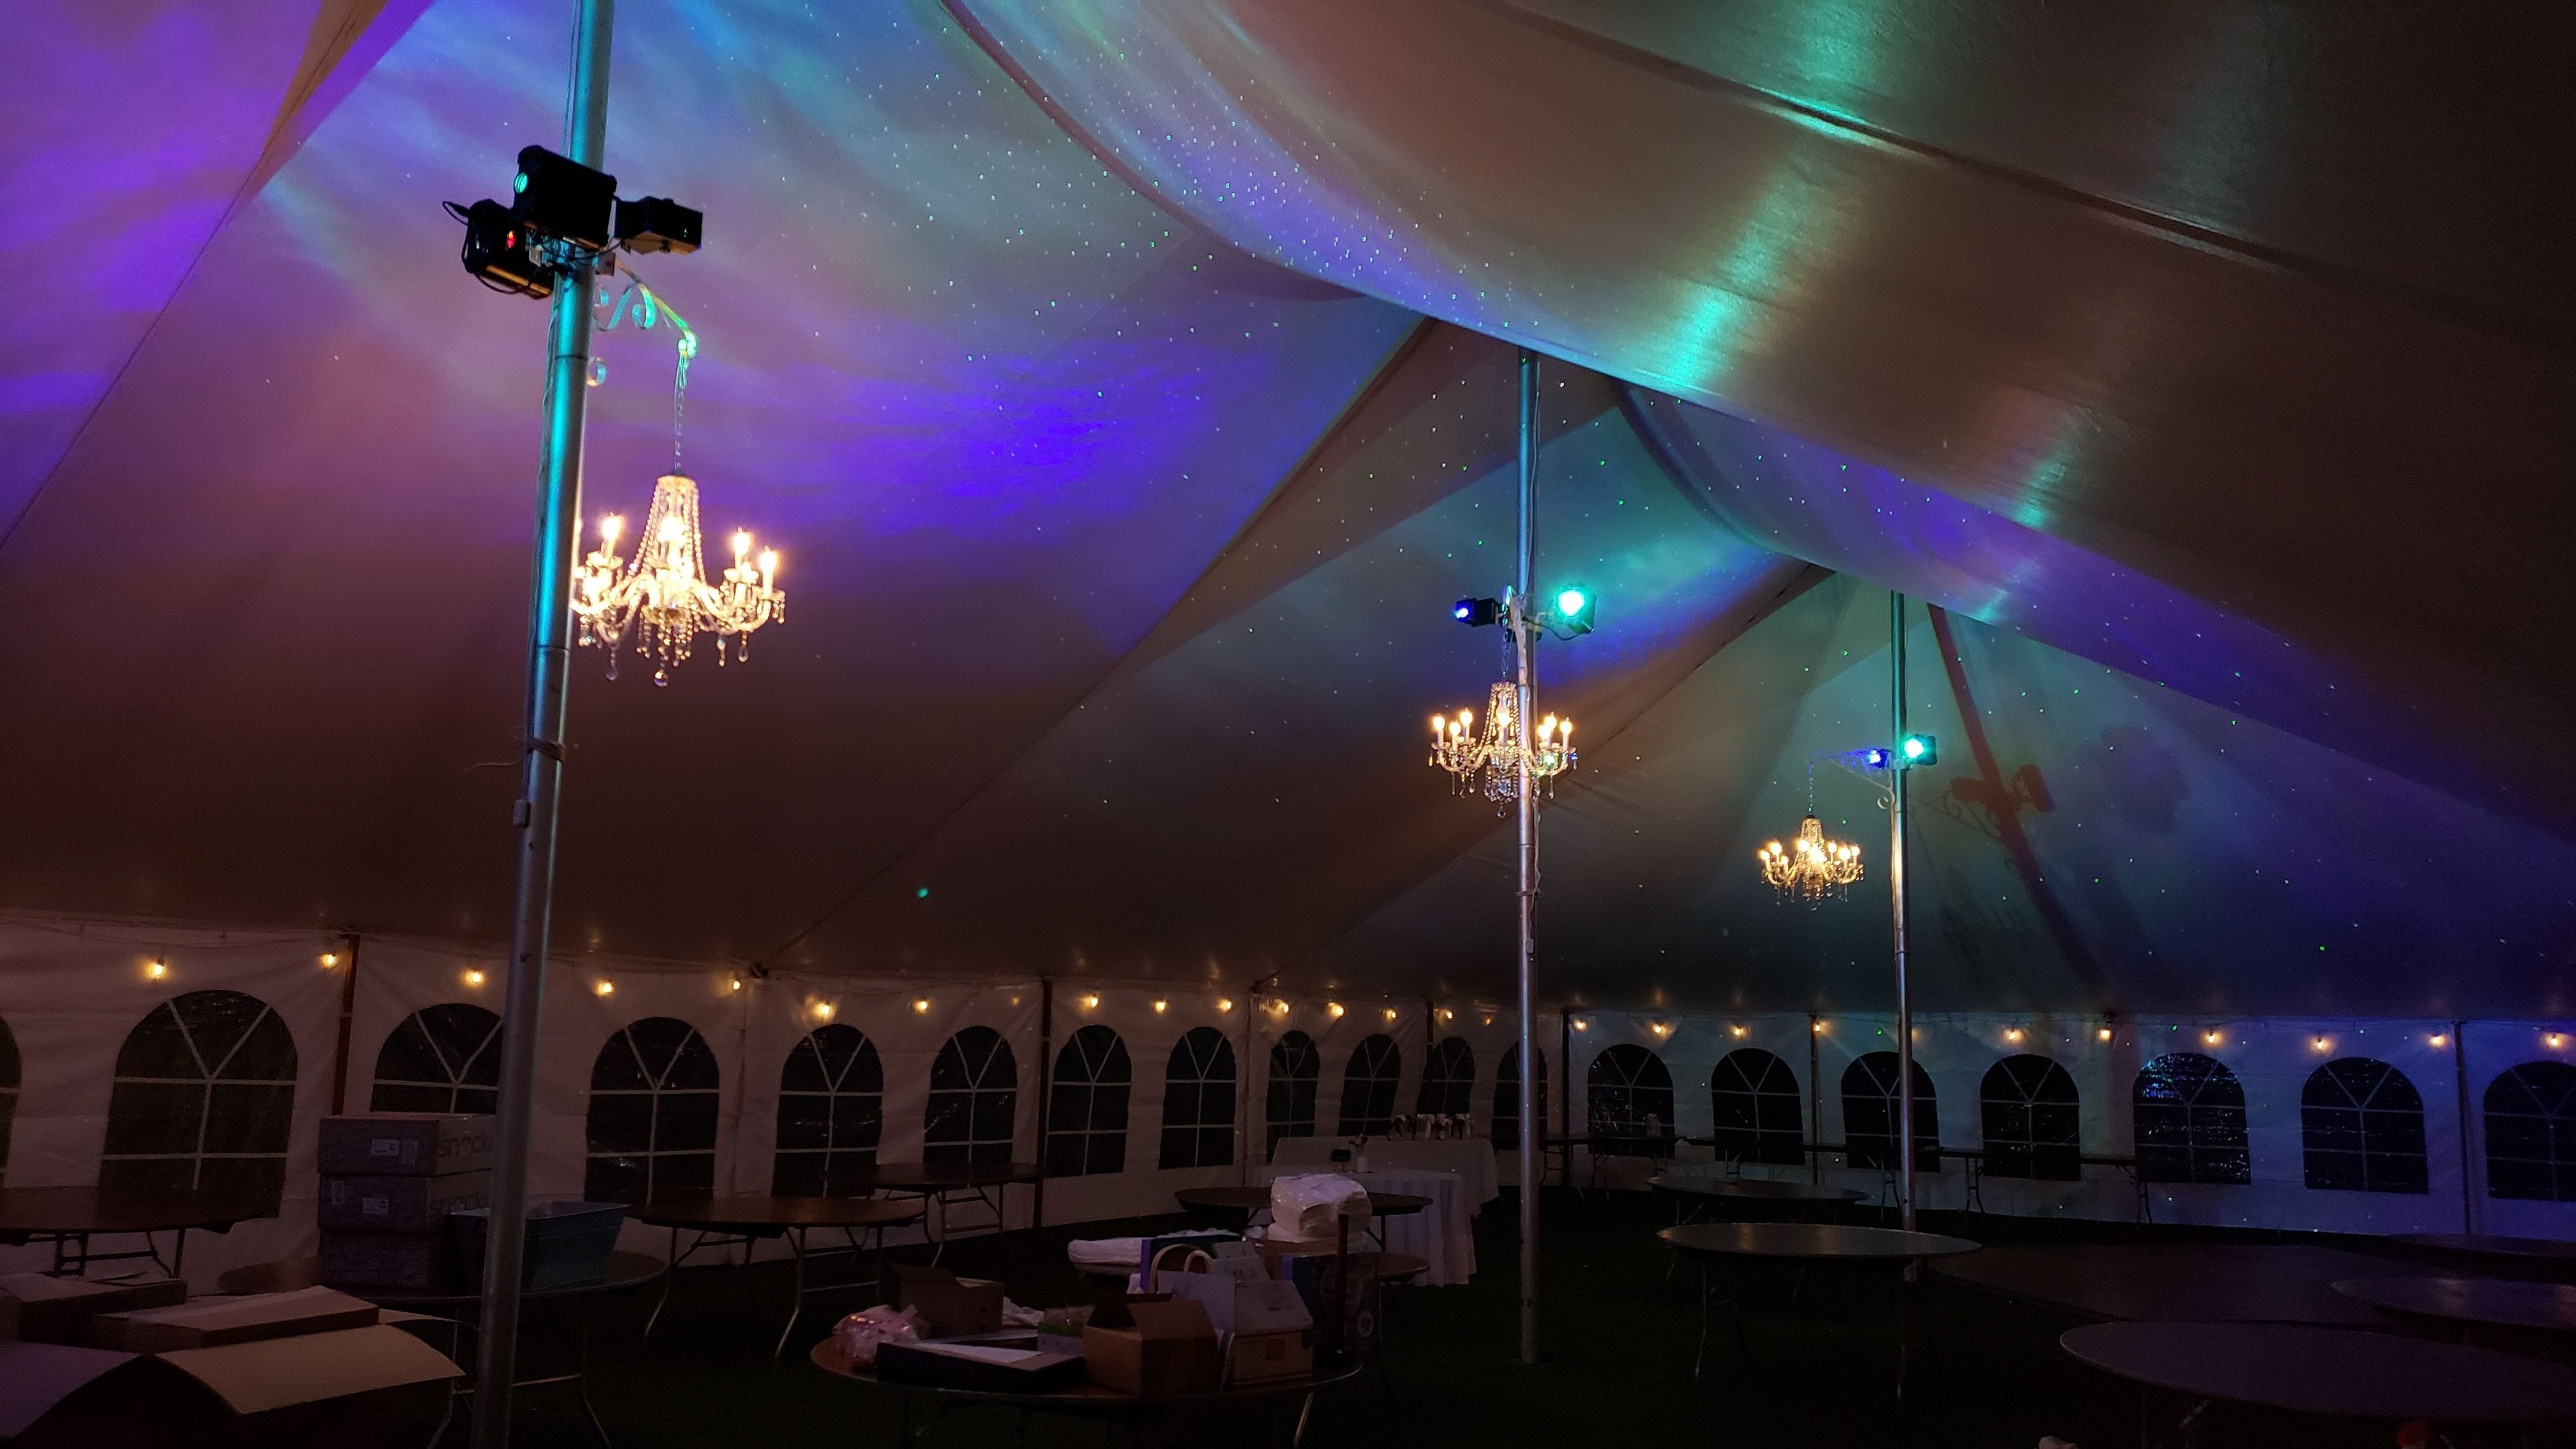 Tent wedding lighting. four chandeliers with perimter bistro. Stars and Northern Lights dance on the tent ceiling.